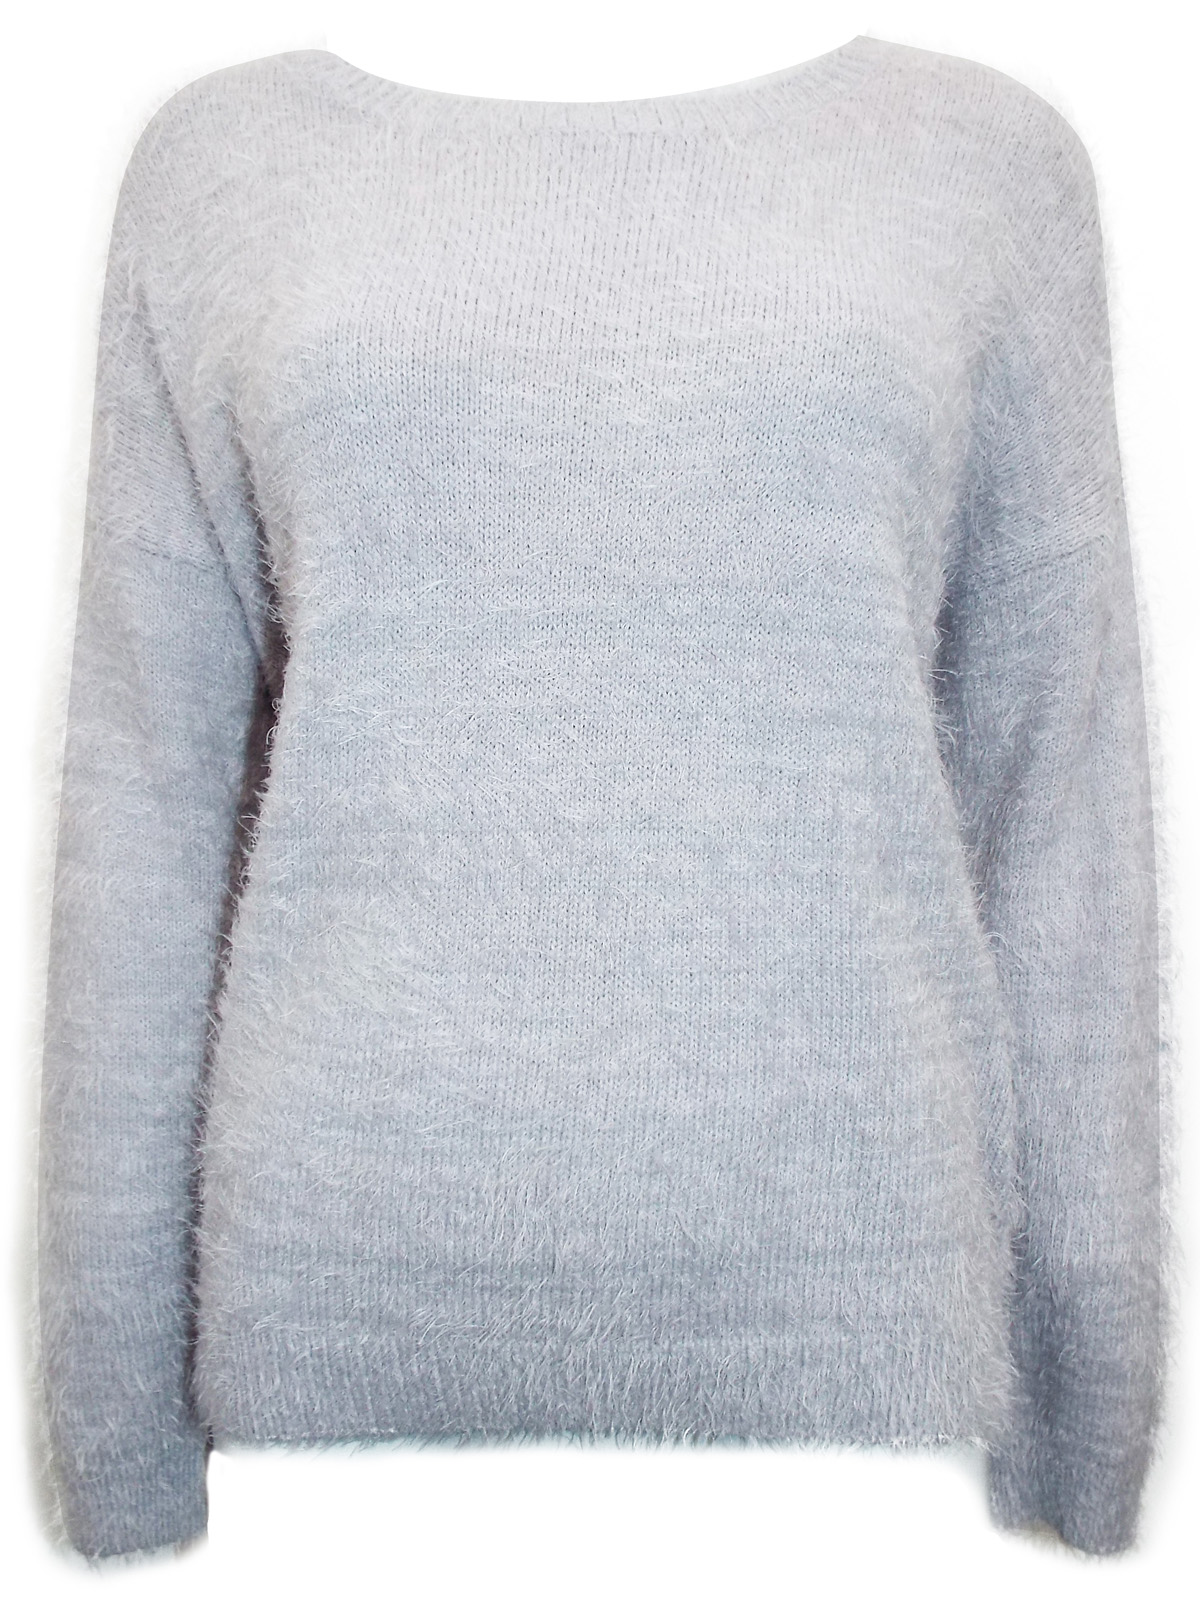 //text.. - - Nina Murati & Zuri ASSORTED Ladies Knitted Jumpers - Size ...